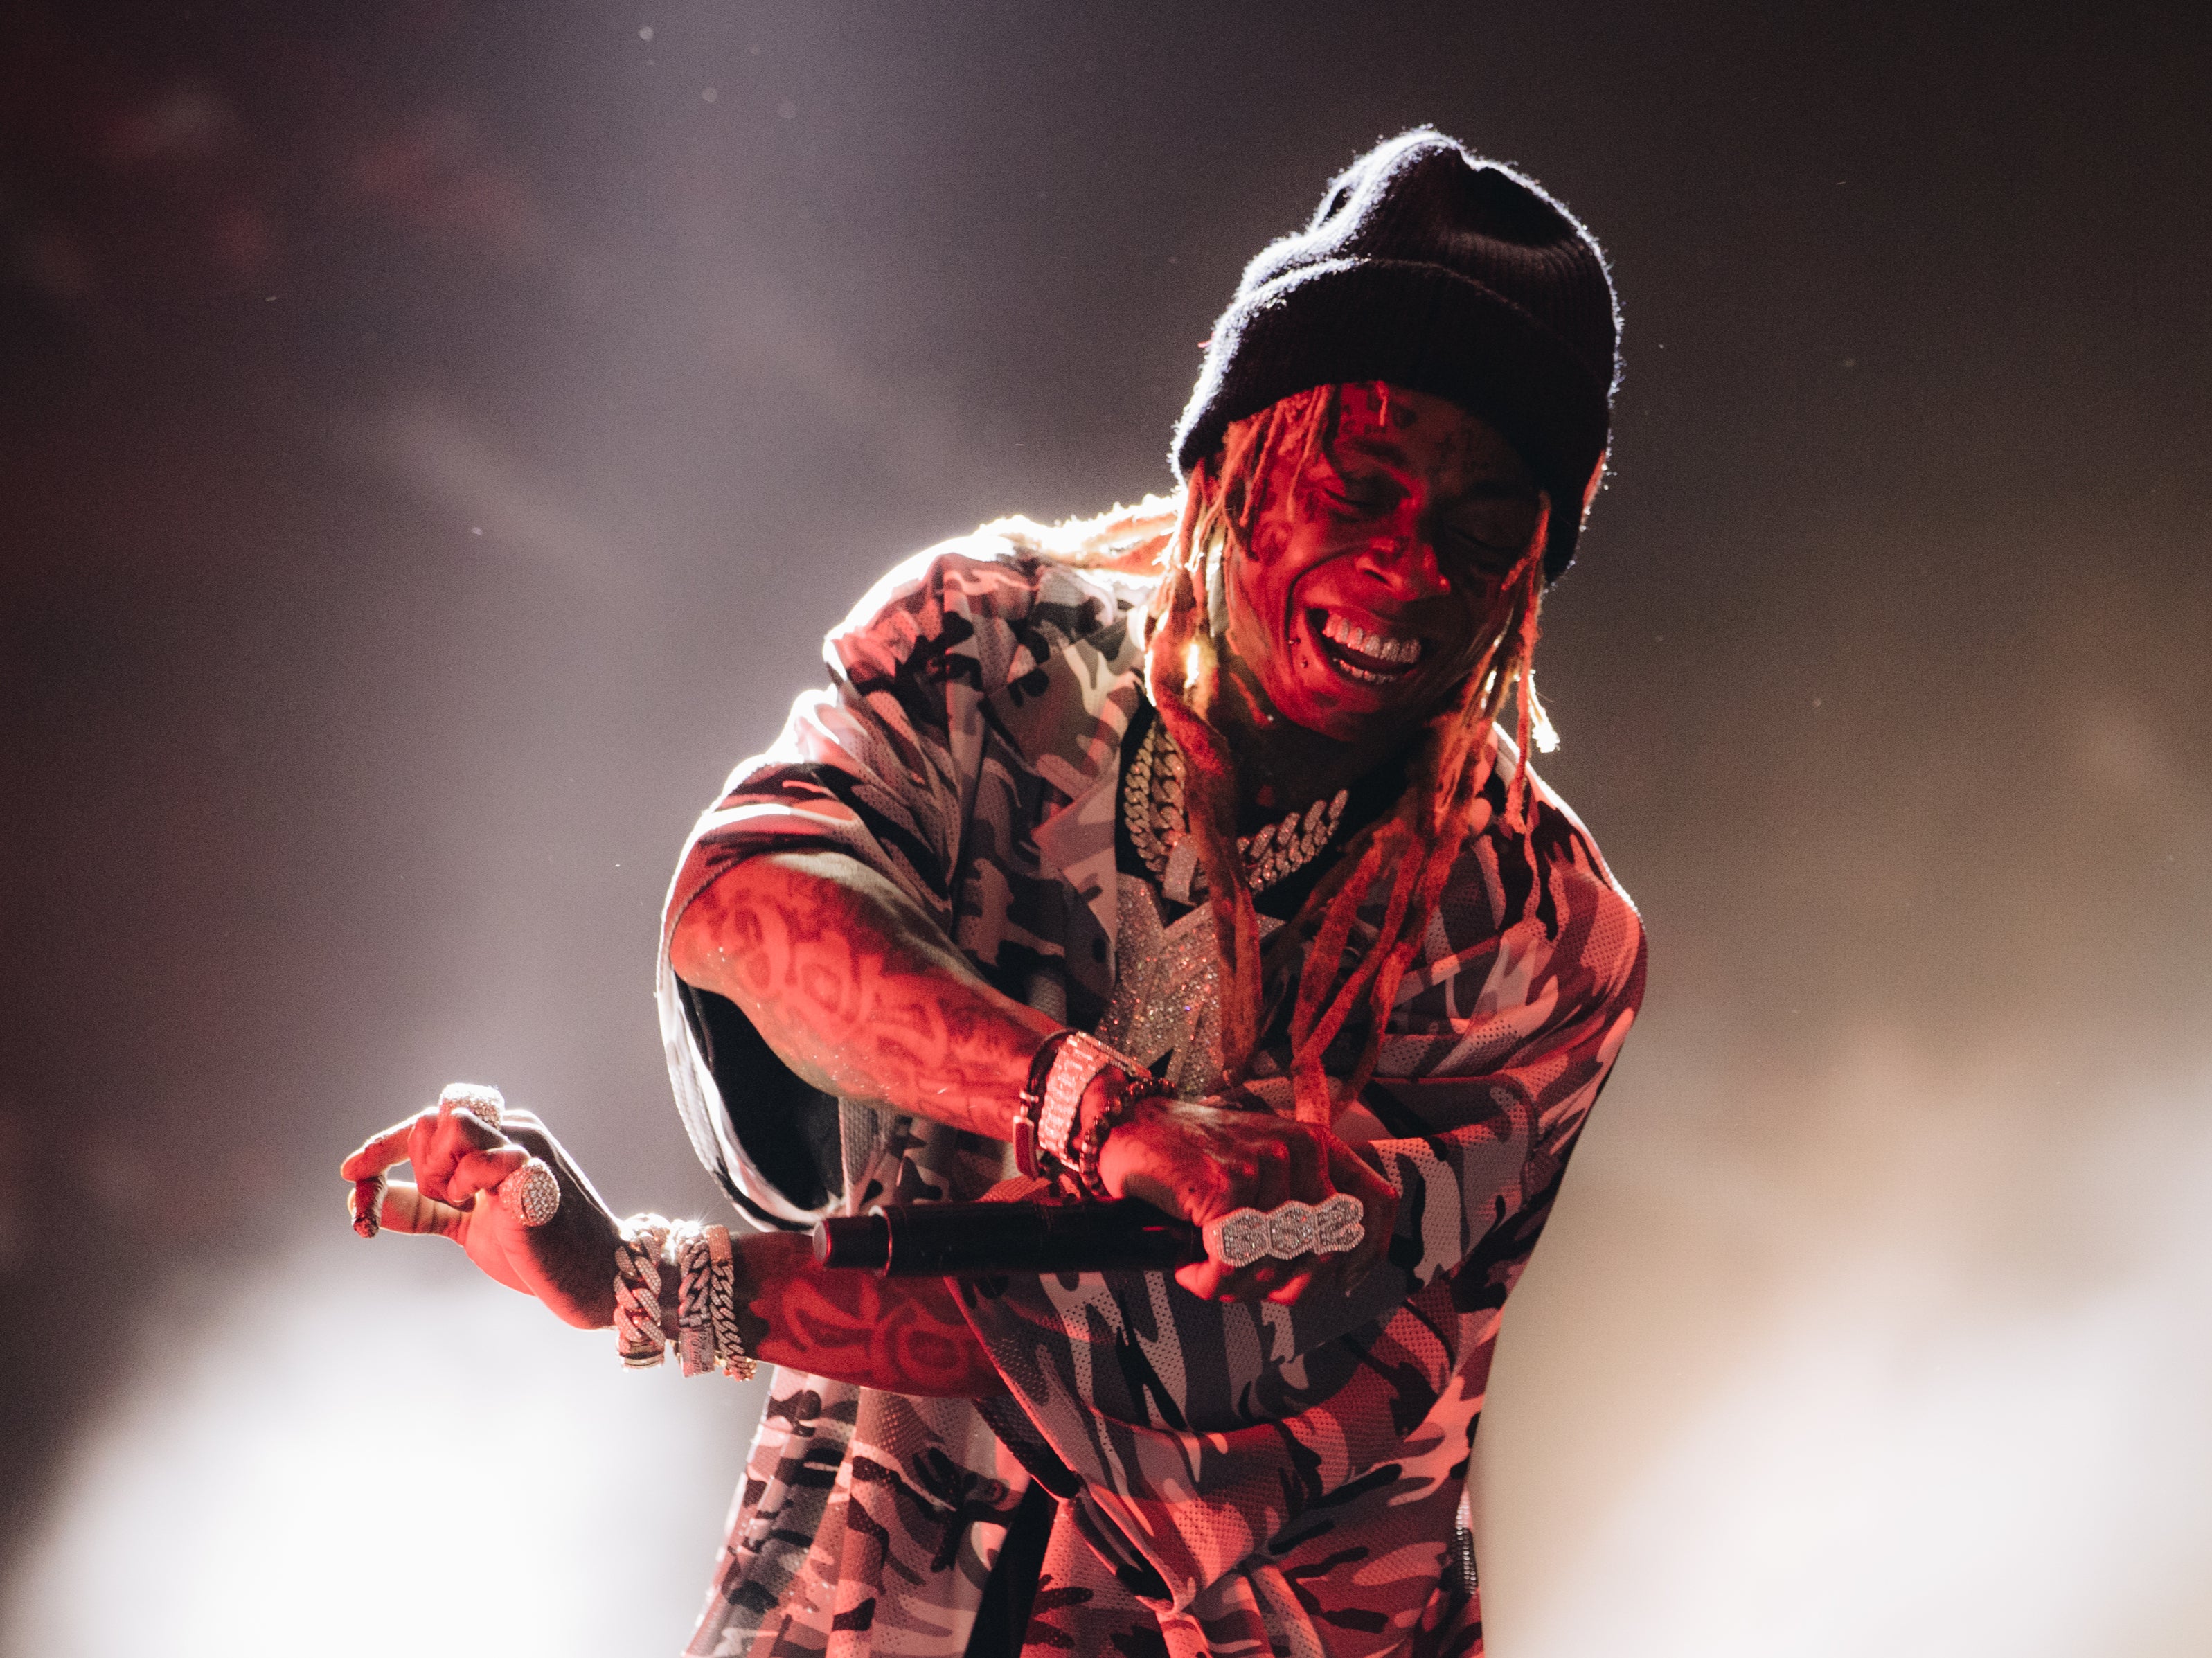 Lil Wayne performs onstage at a hip hop festival in Los Angeles on 13 August 2021